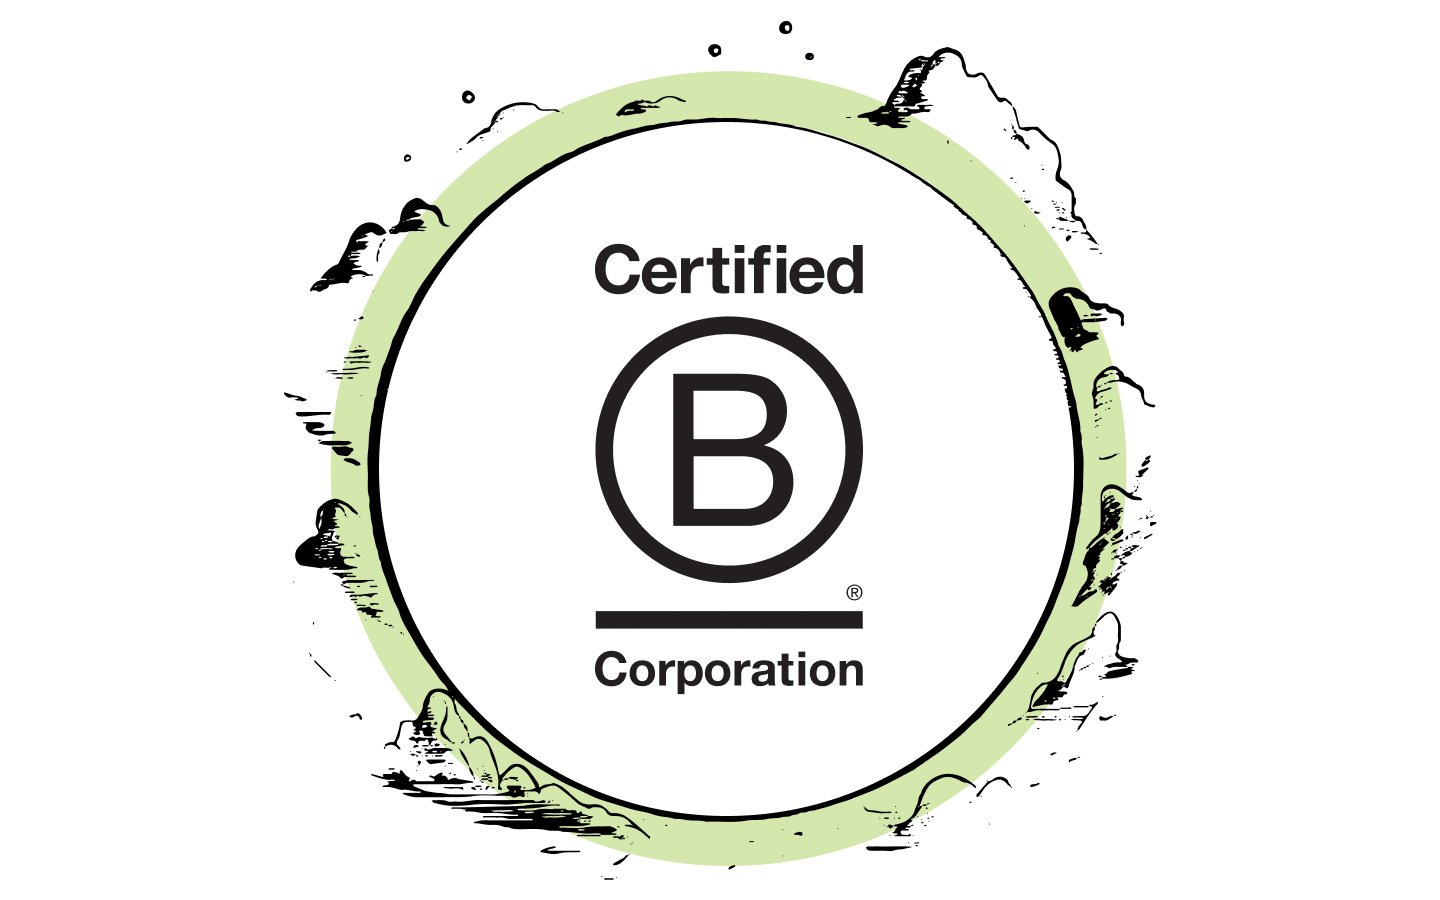 Why Articulate Marketing became a B Corp